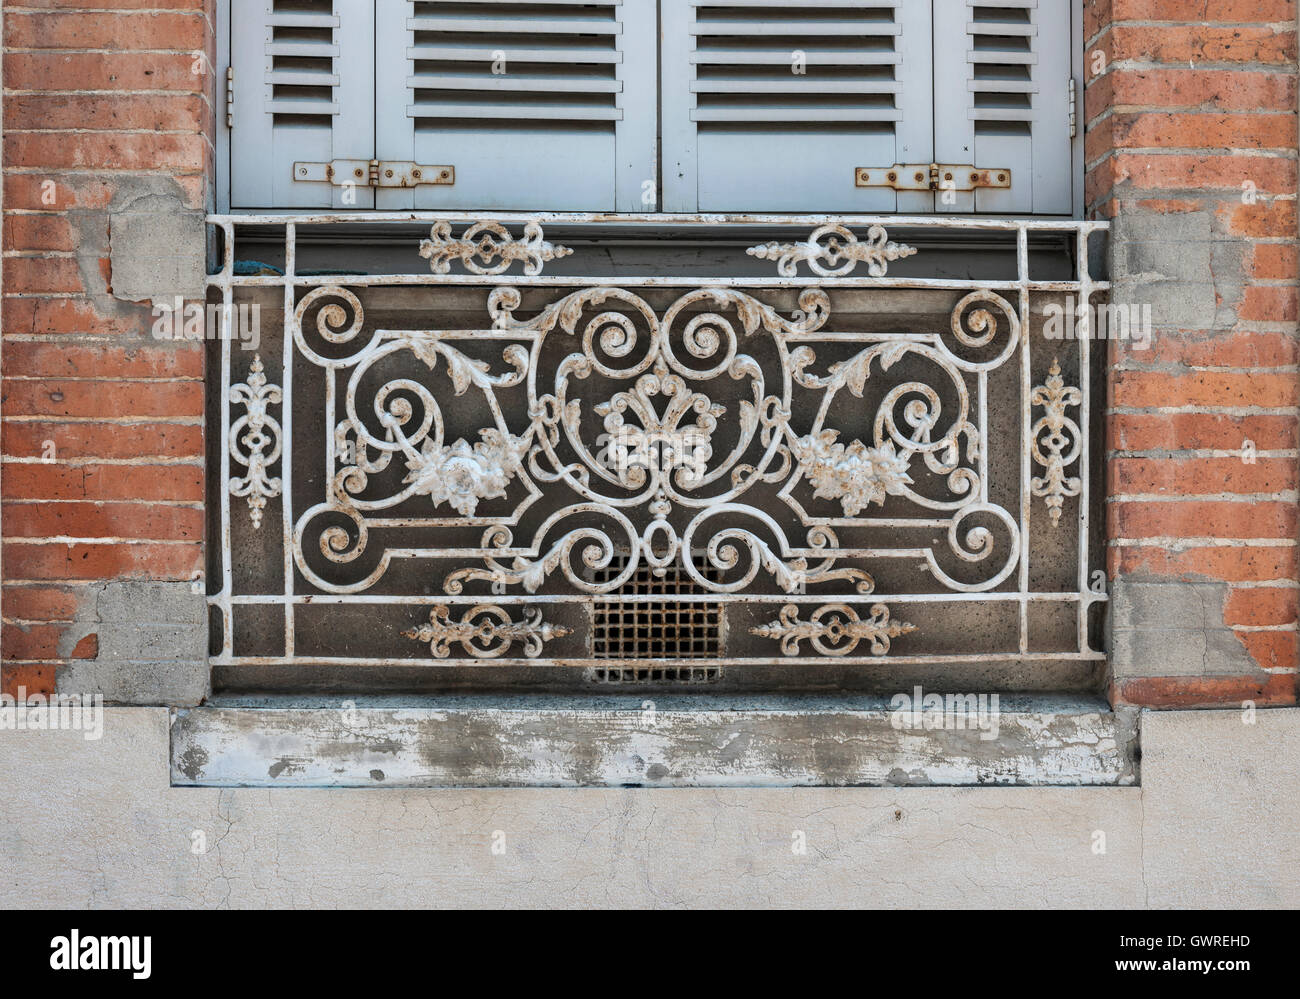 Window with blue shutters and ornate wrought iron window box or balcony on old brick building in Toulouse, France. Stock Photo